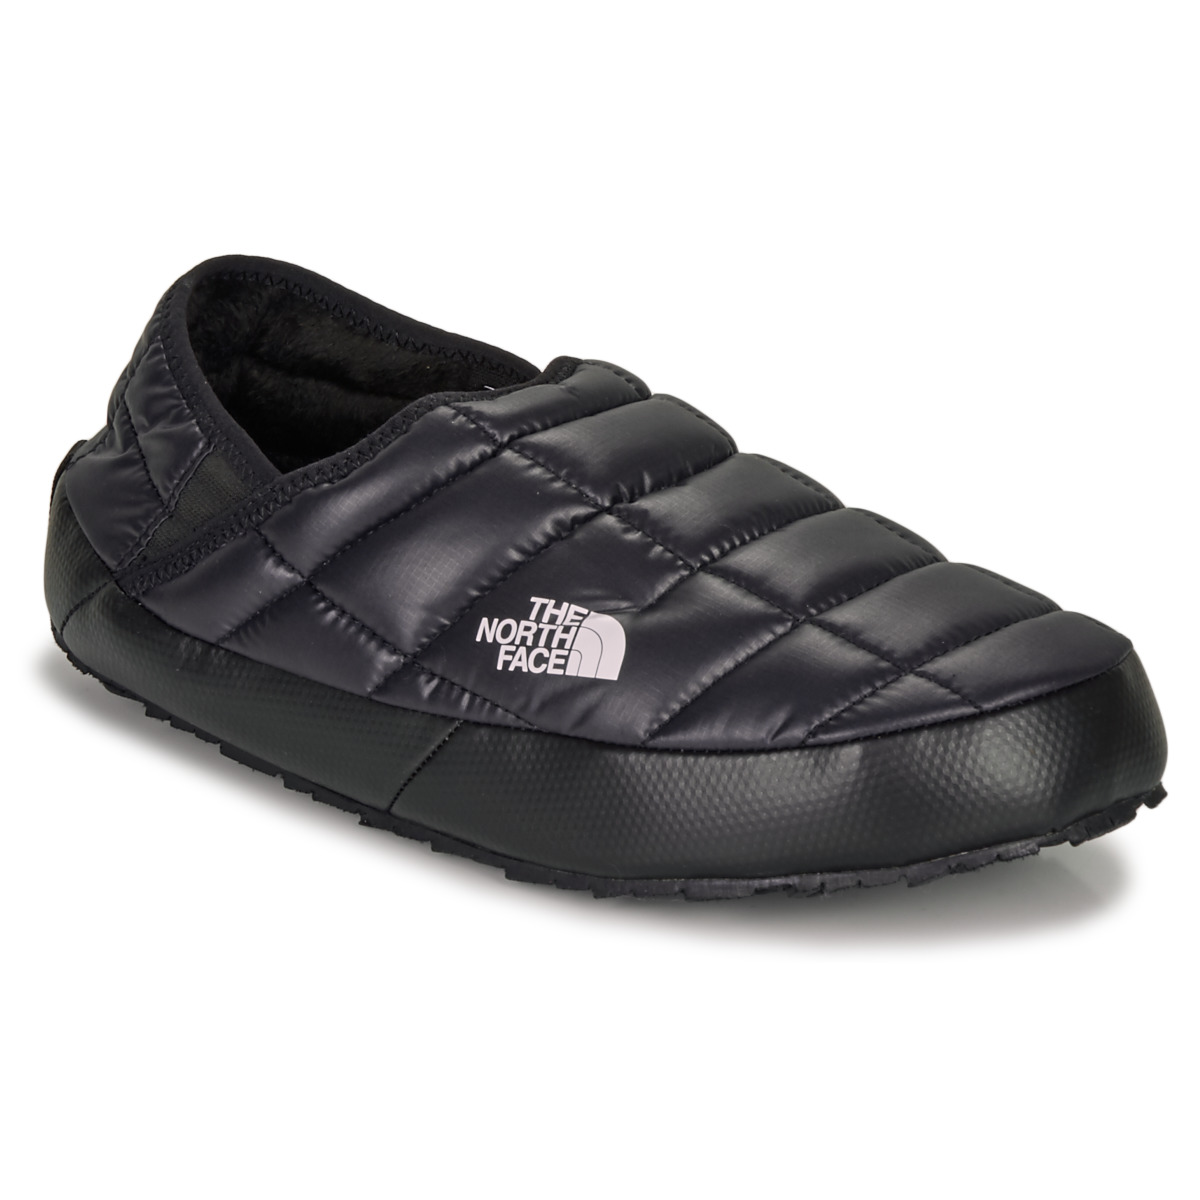 Sko Herre Tøfler The North Face THERMOBALL TRACTION MULE V Sort / Hvid